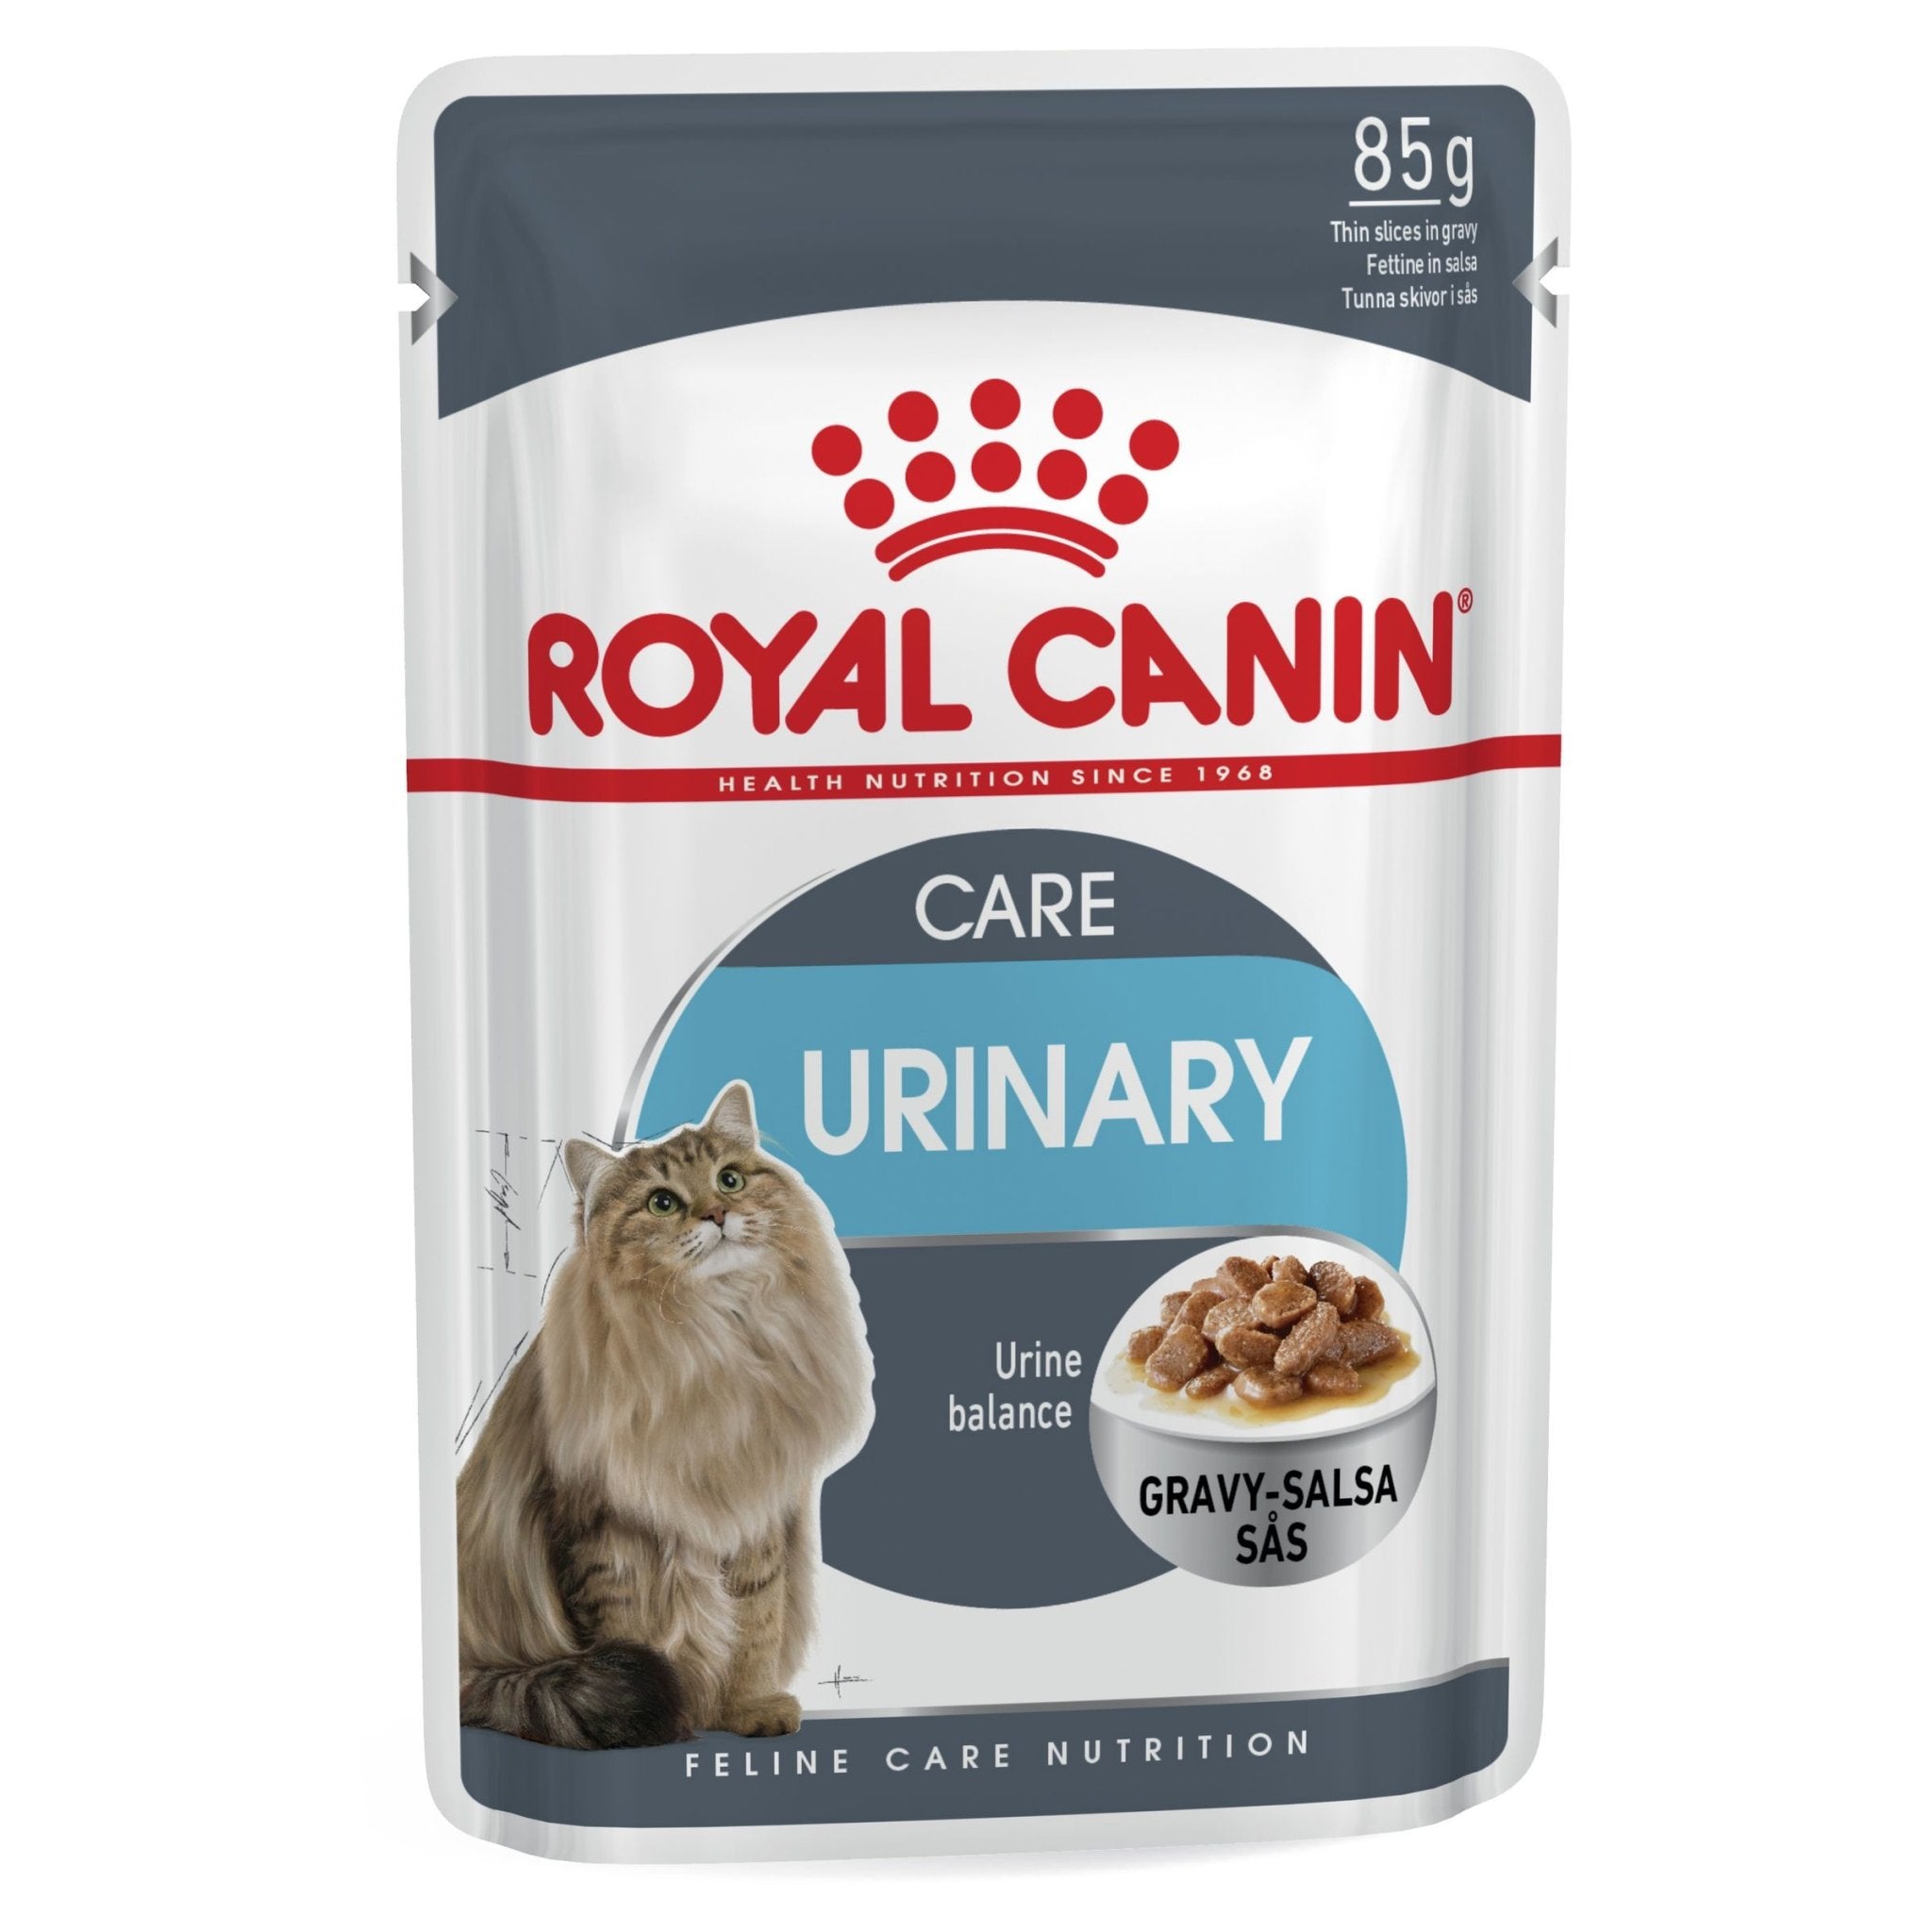 Royal Canin Urinary Care In Gravy, 12x85g